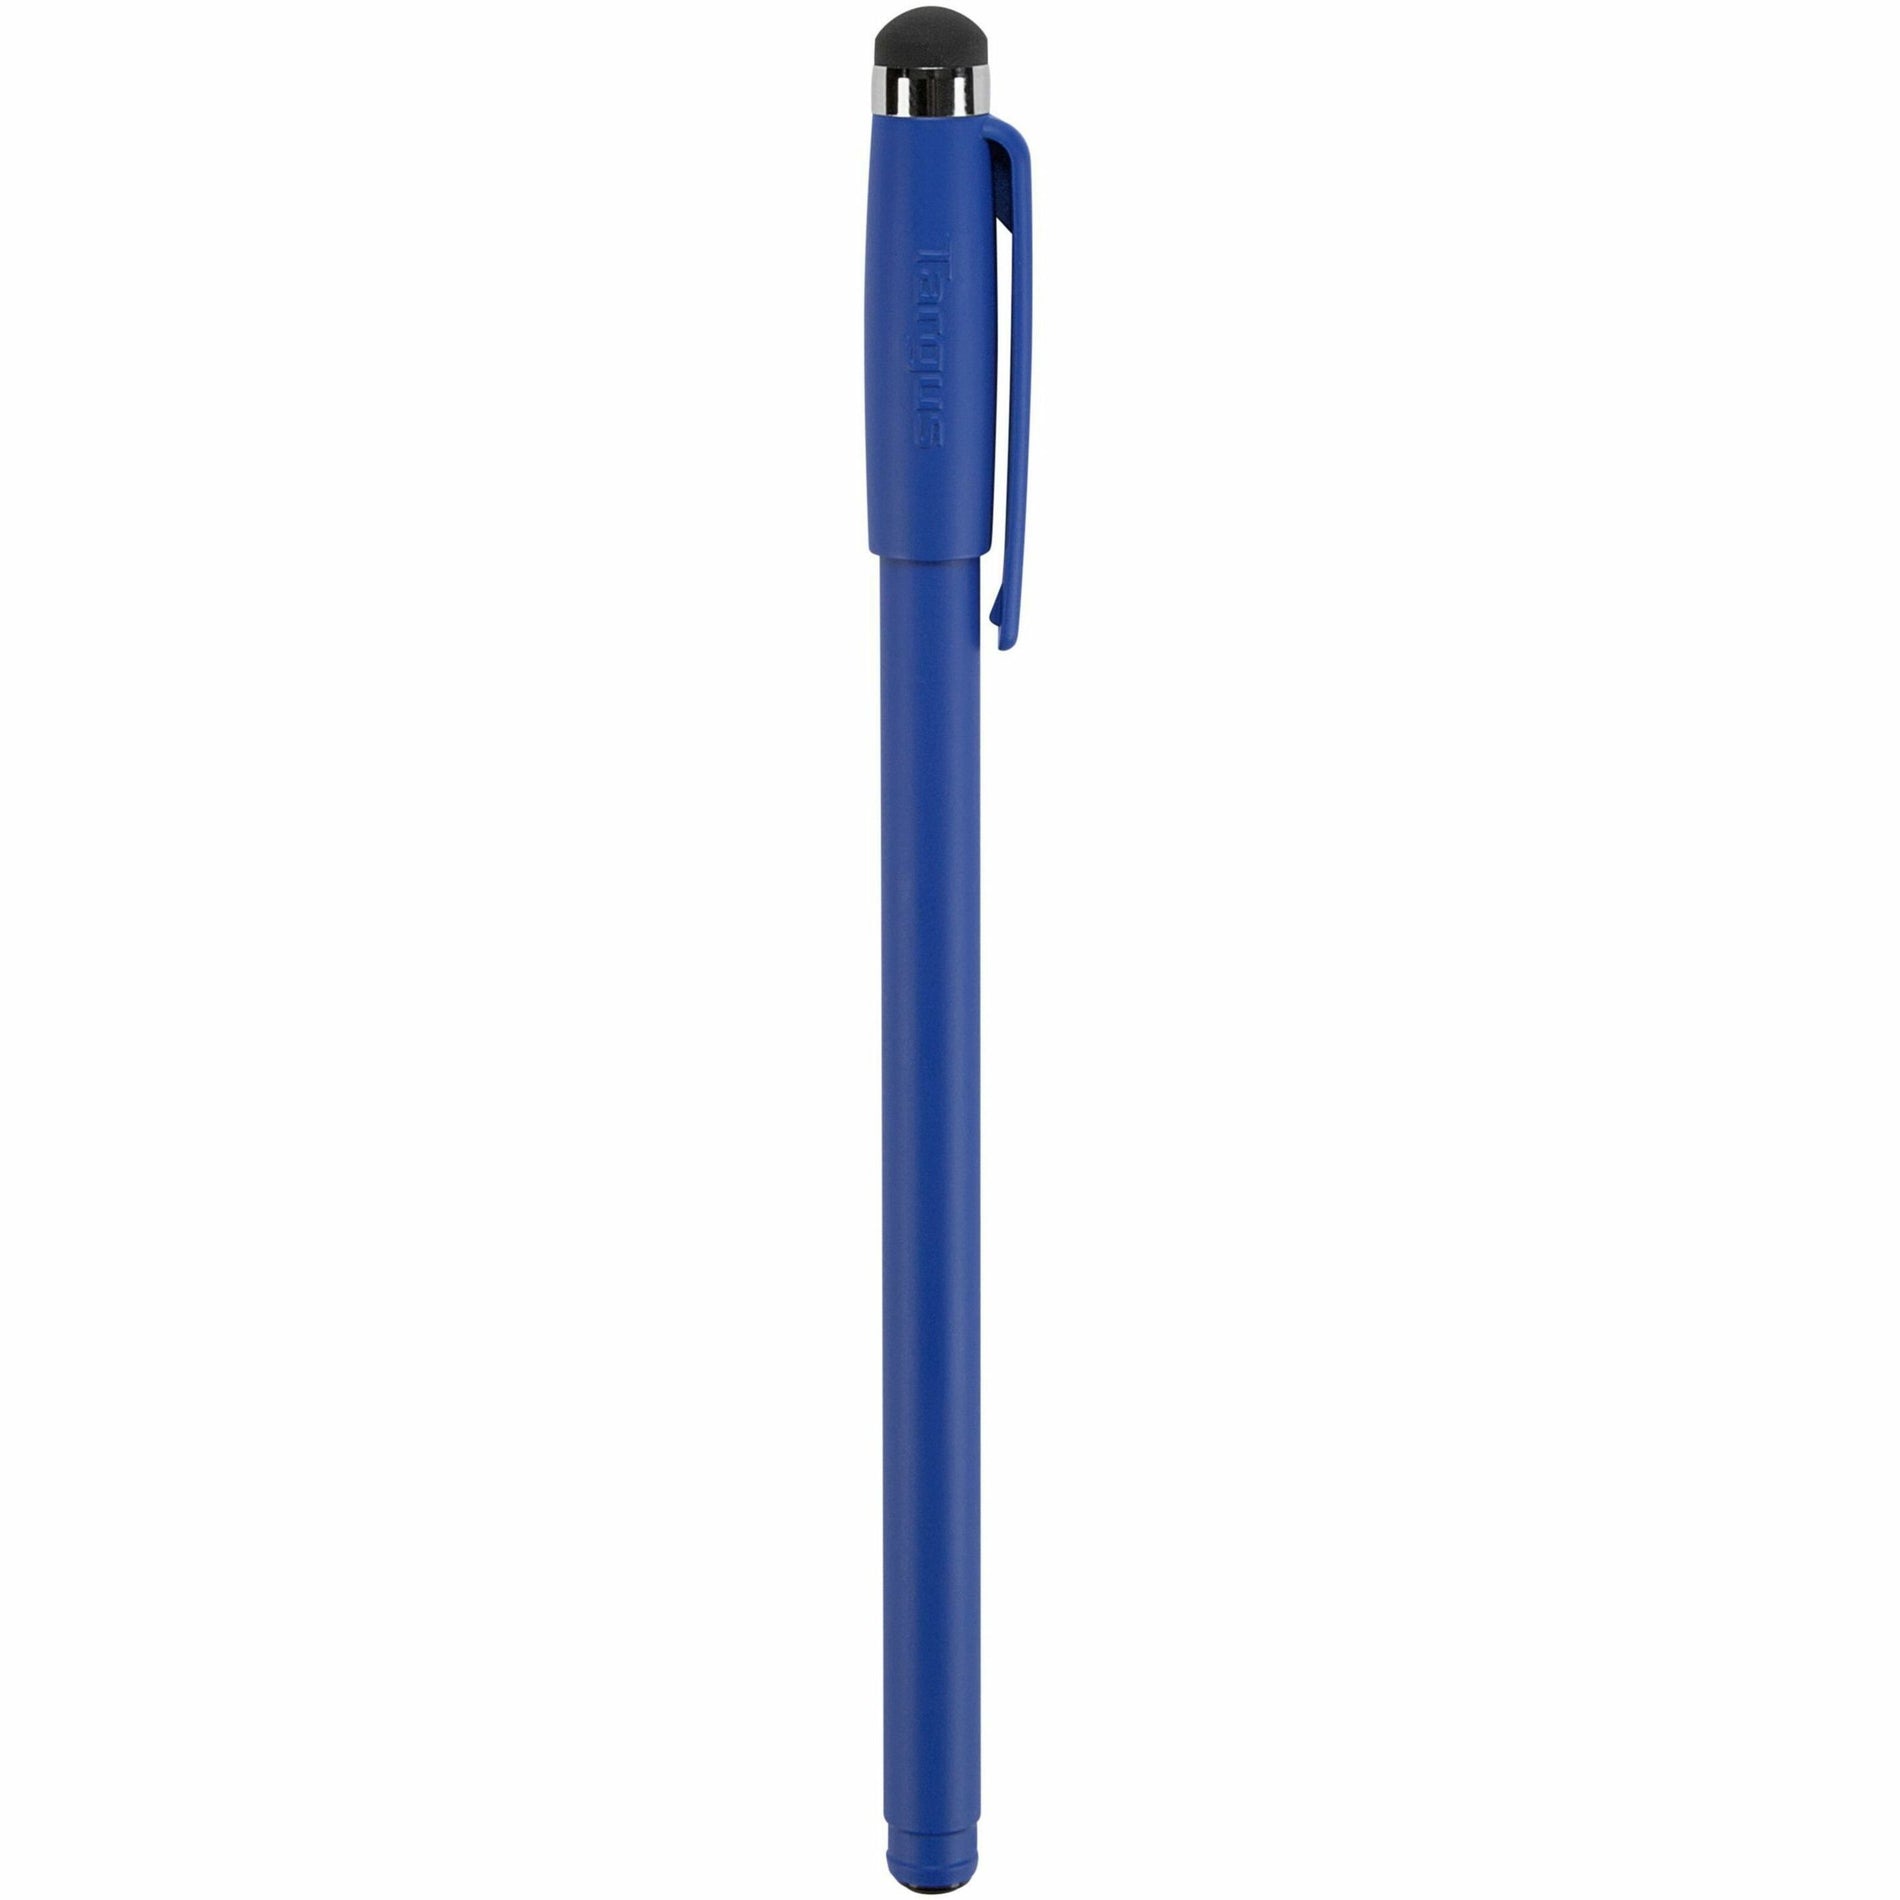 Targus AMM0601TBUS Antimicrobial Stylus & Pen (3 Pack), Touchscreen Devices, 1 Year Warranty